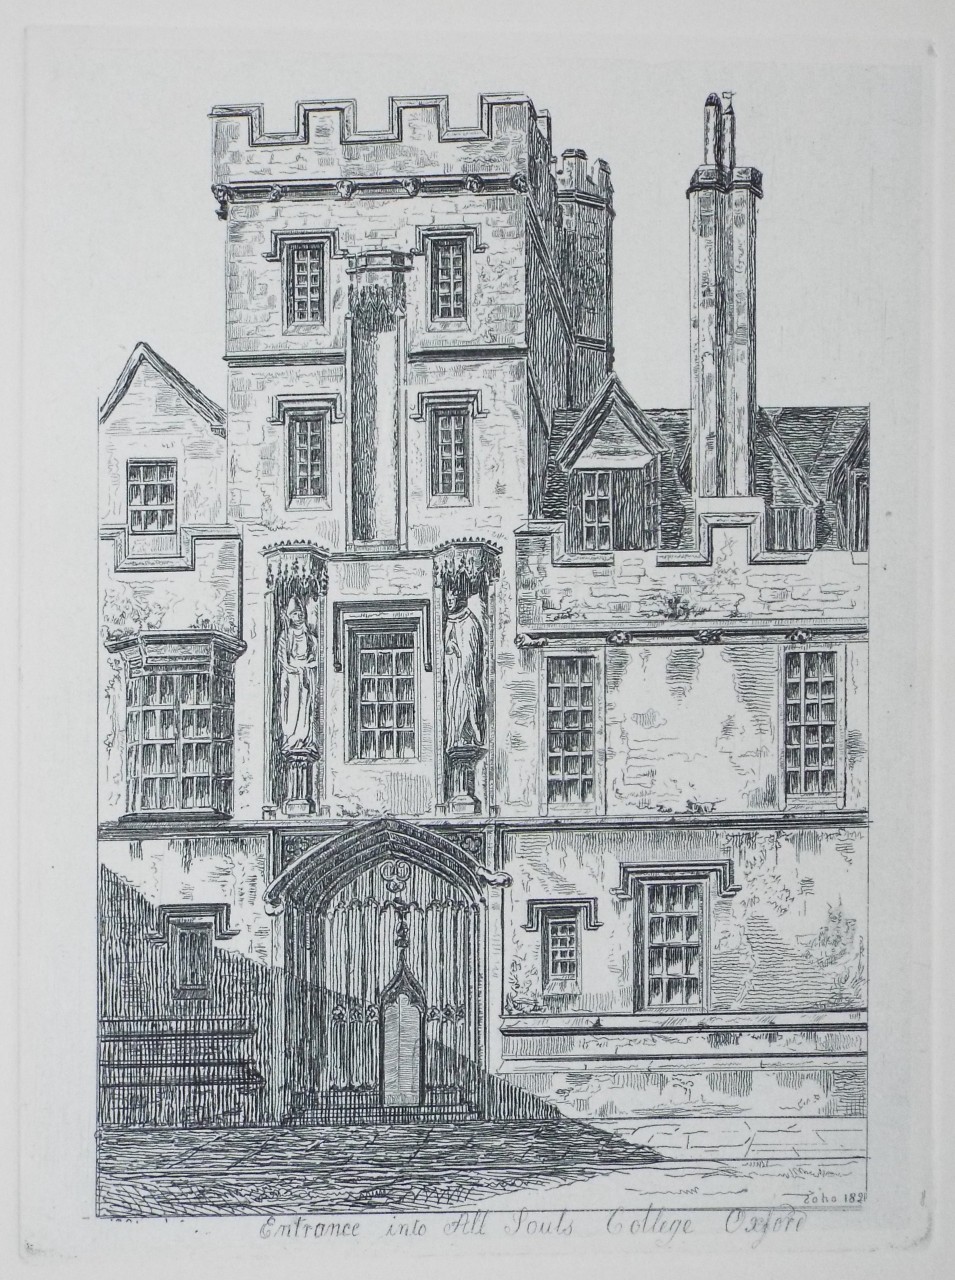 Etching - Entrance into All Souls College Oxford - Wilkinson